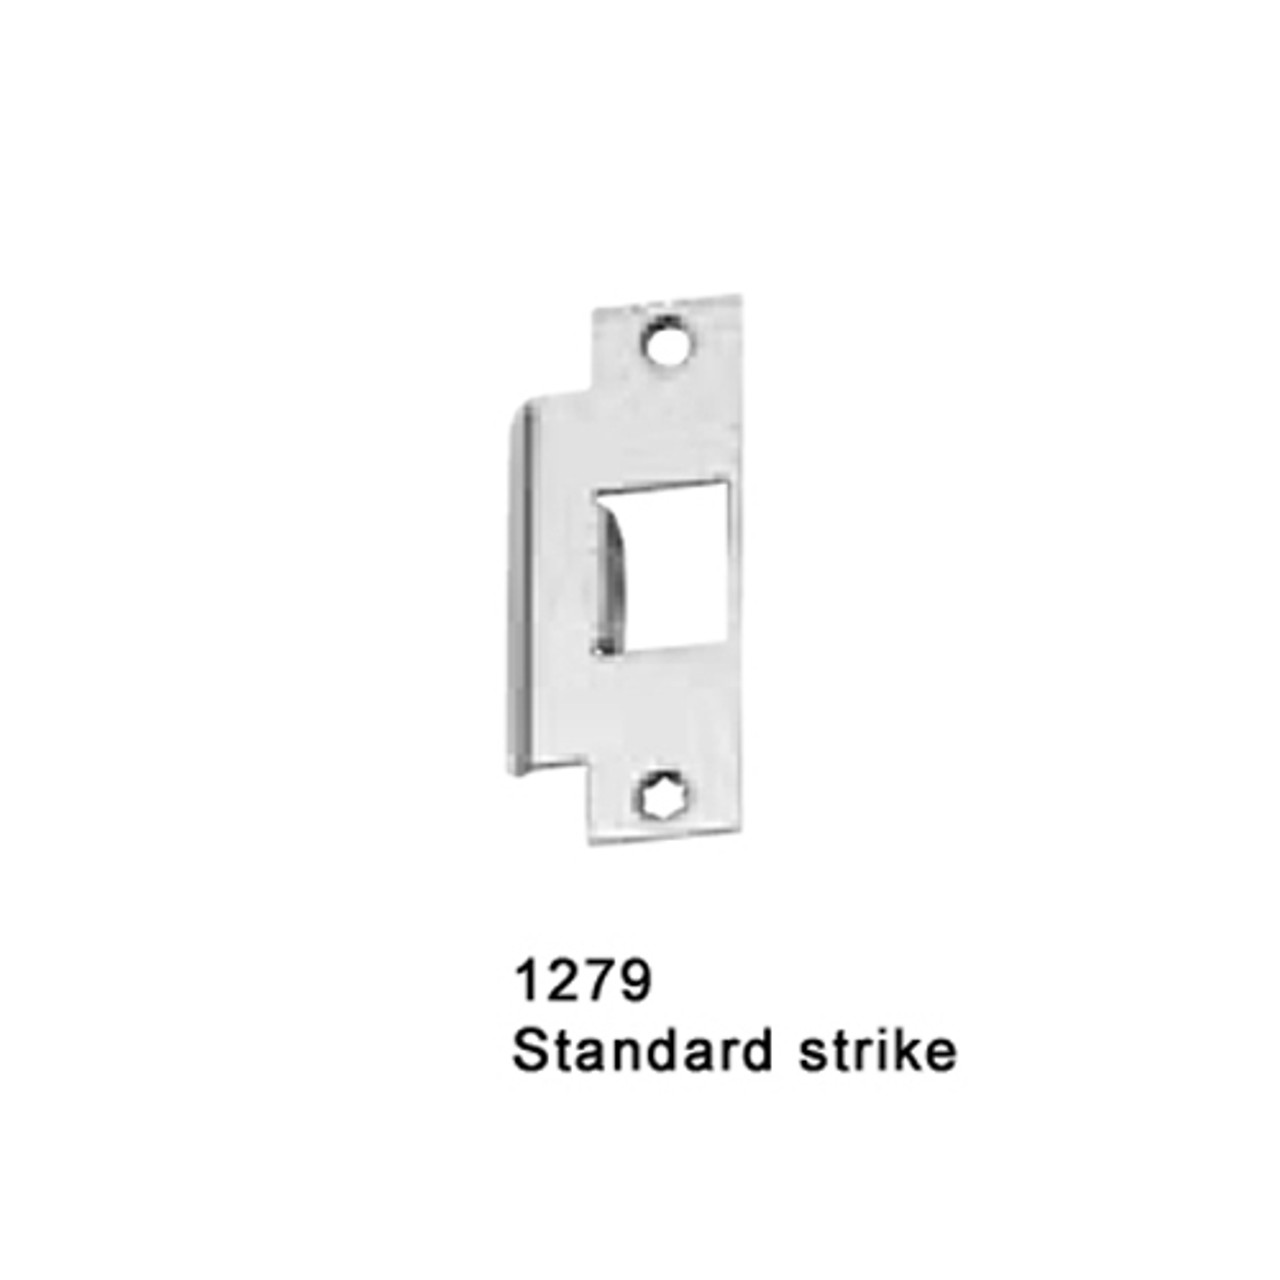 CD25-M-L-BE-DANE-US15-4-RHR Falcon 25 Series Mortise Lock Devices 510L-BE Dane Lever Trim with Blank Escutcheon in Satin Nickel